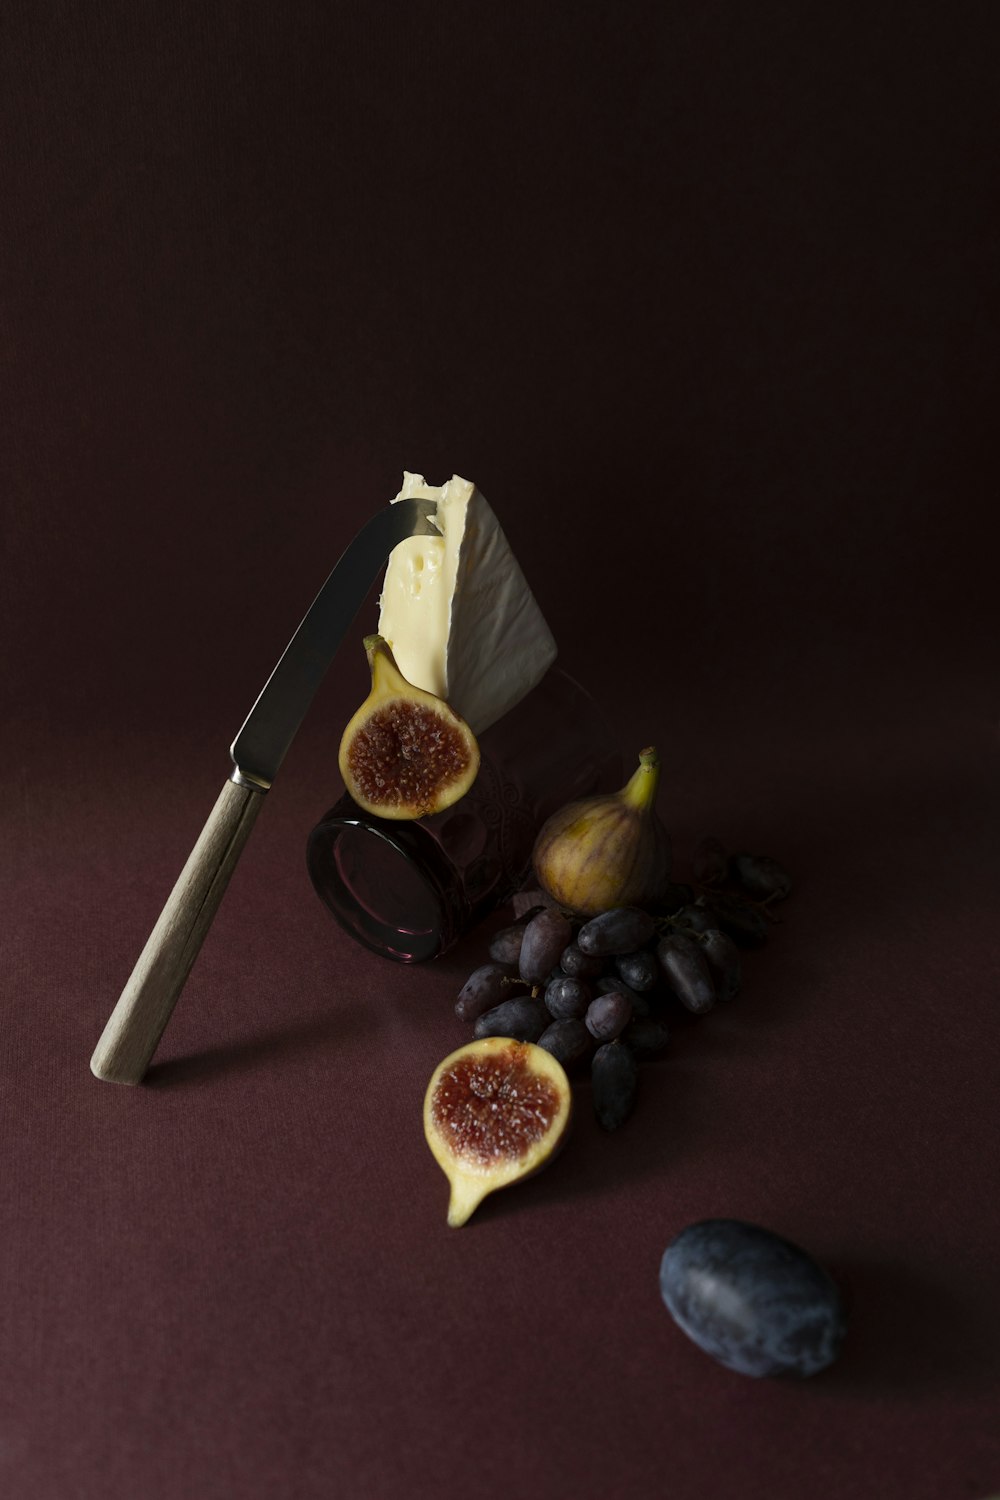 a knife and some fruit on a table